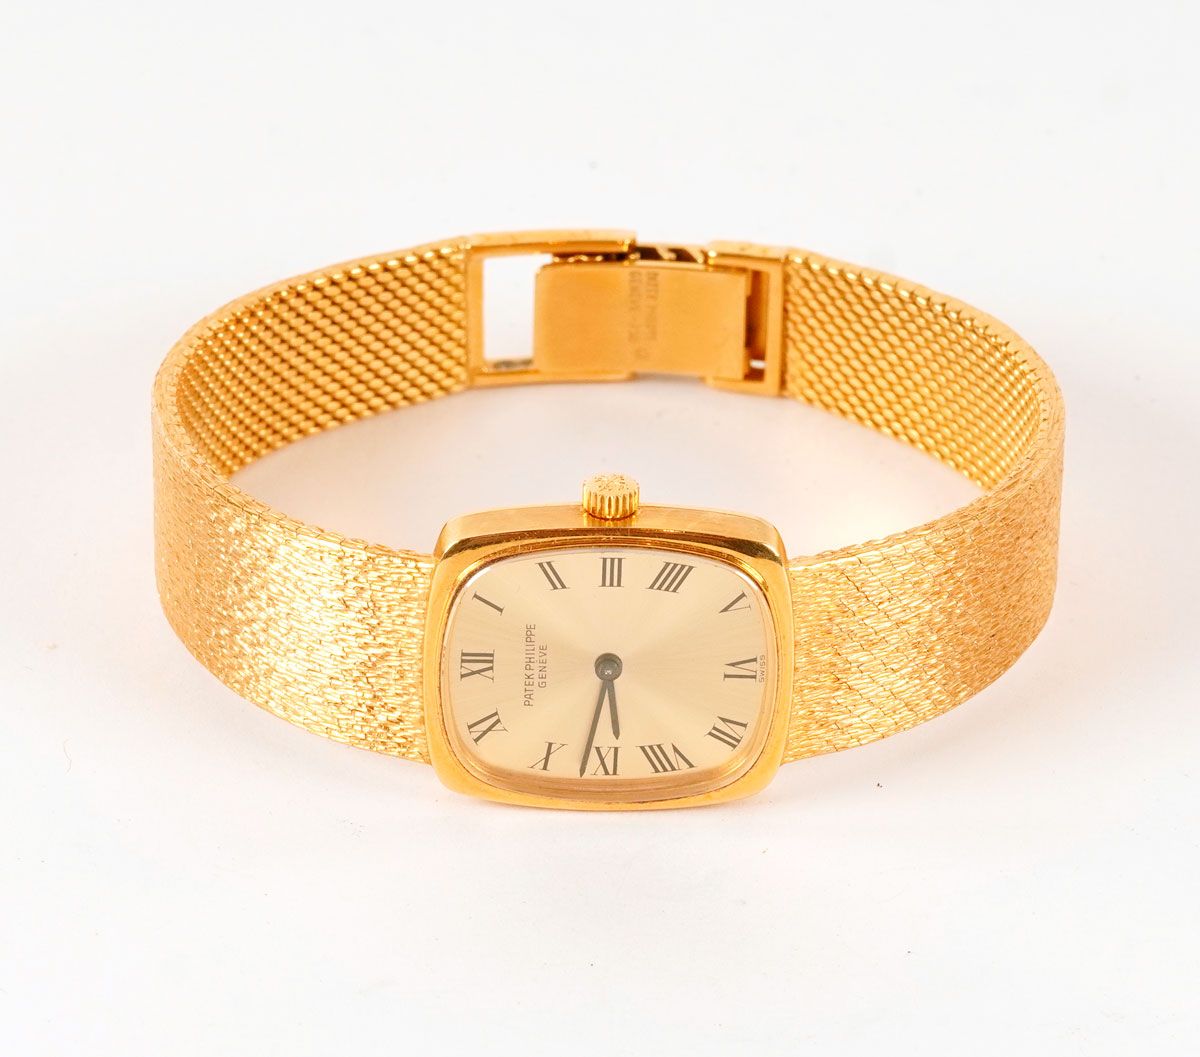 Null PATEK PHILIPPE
Philippe Patek lady's watch in 18K gold.
Gross weight: 54.6g